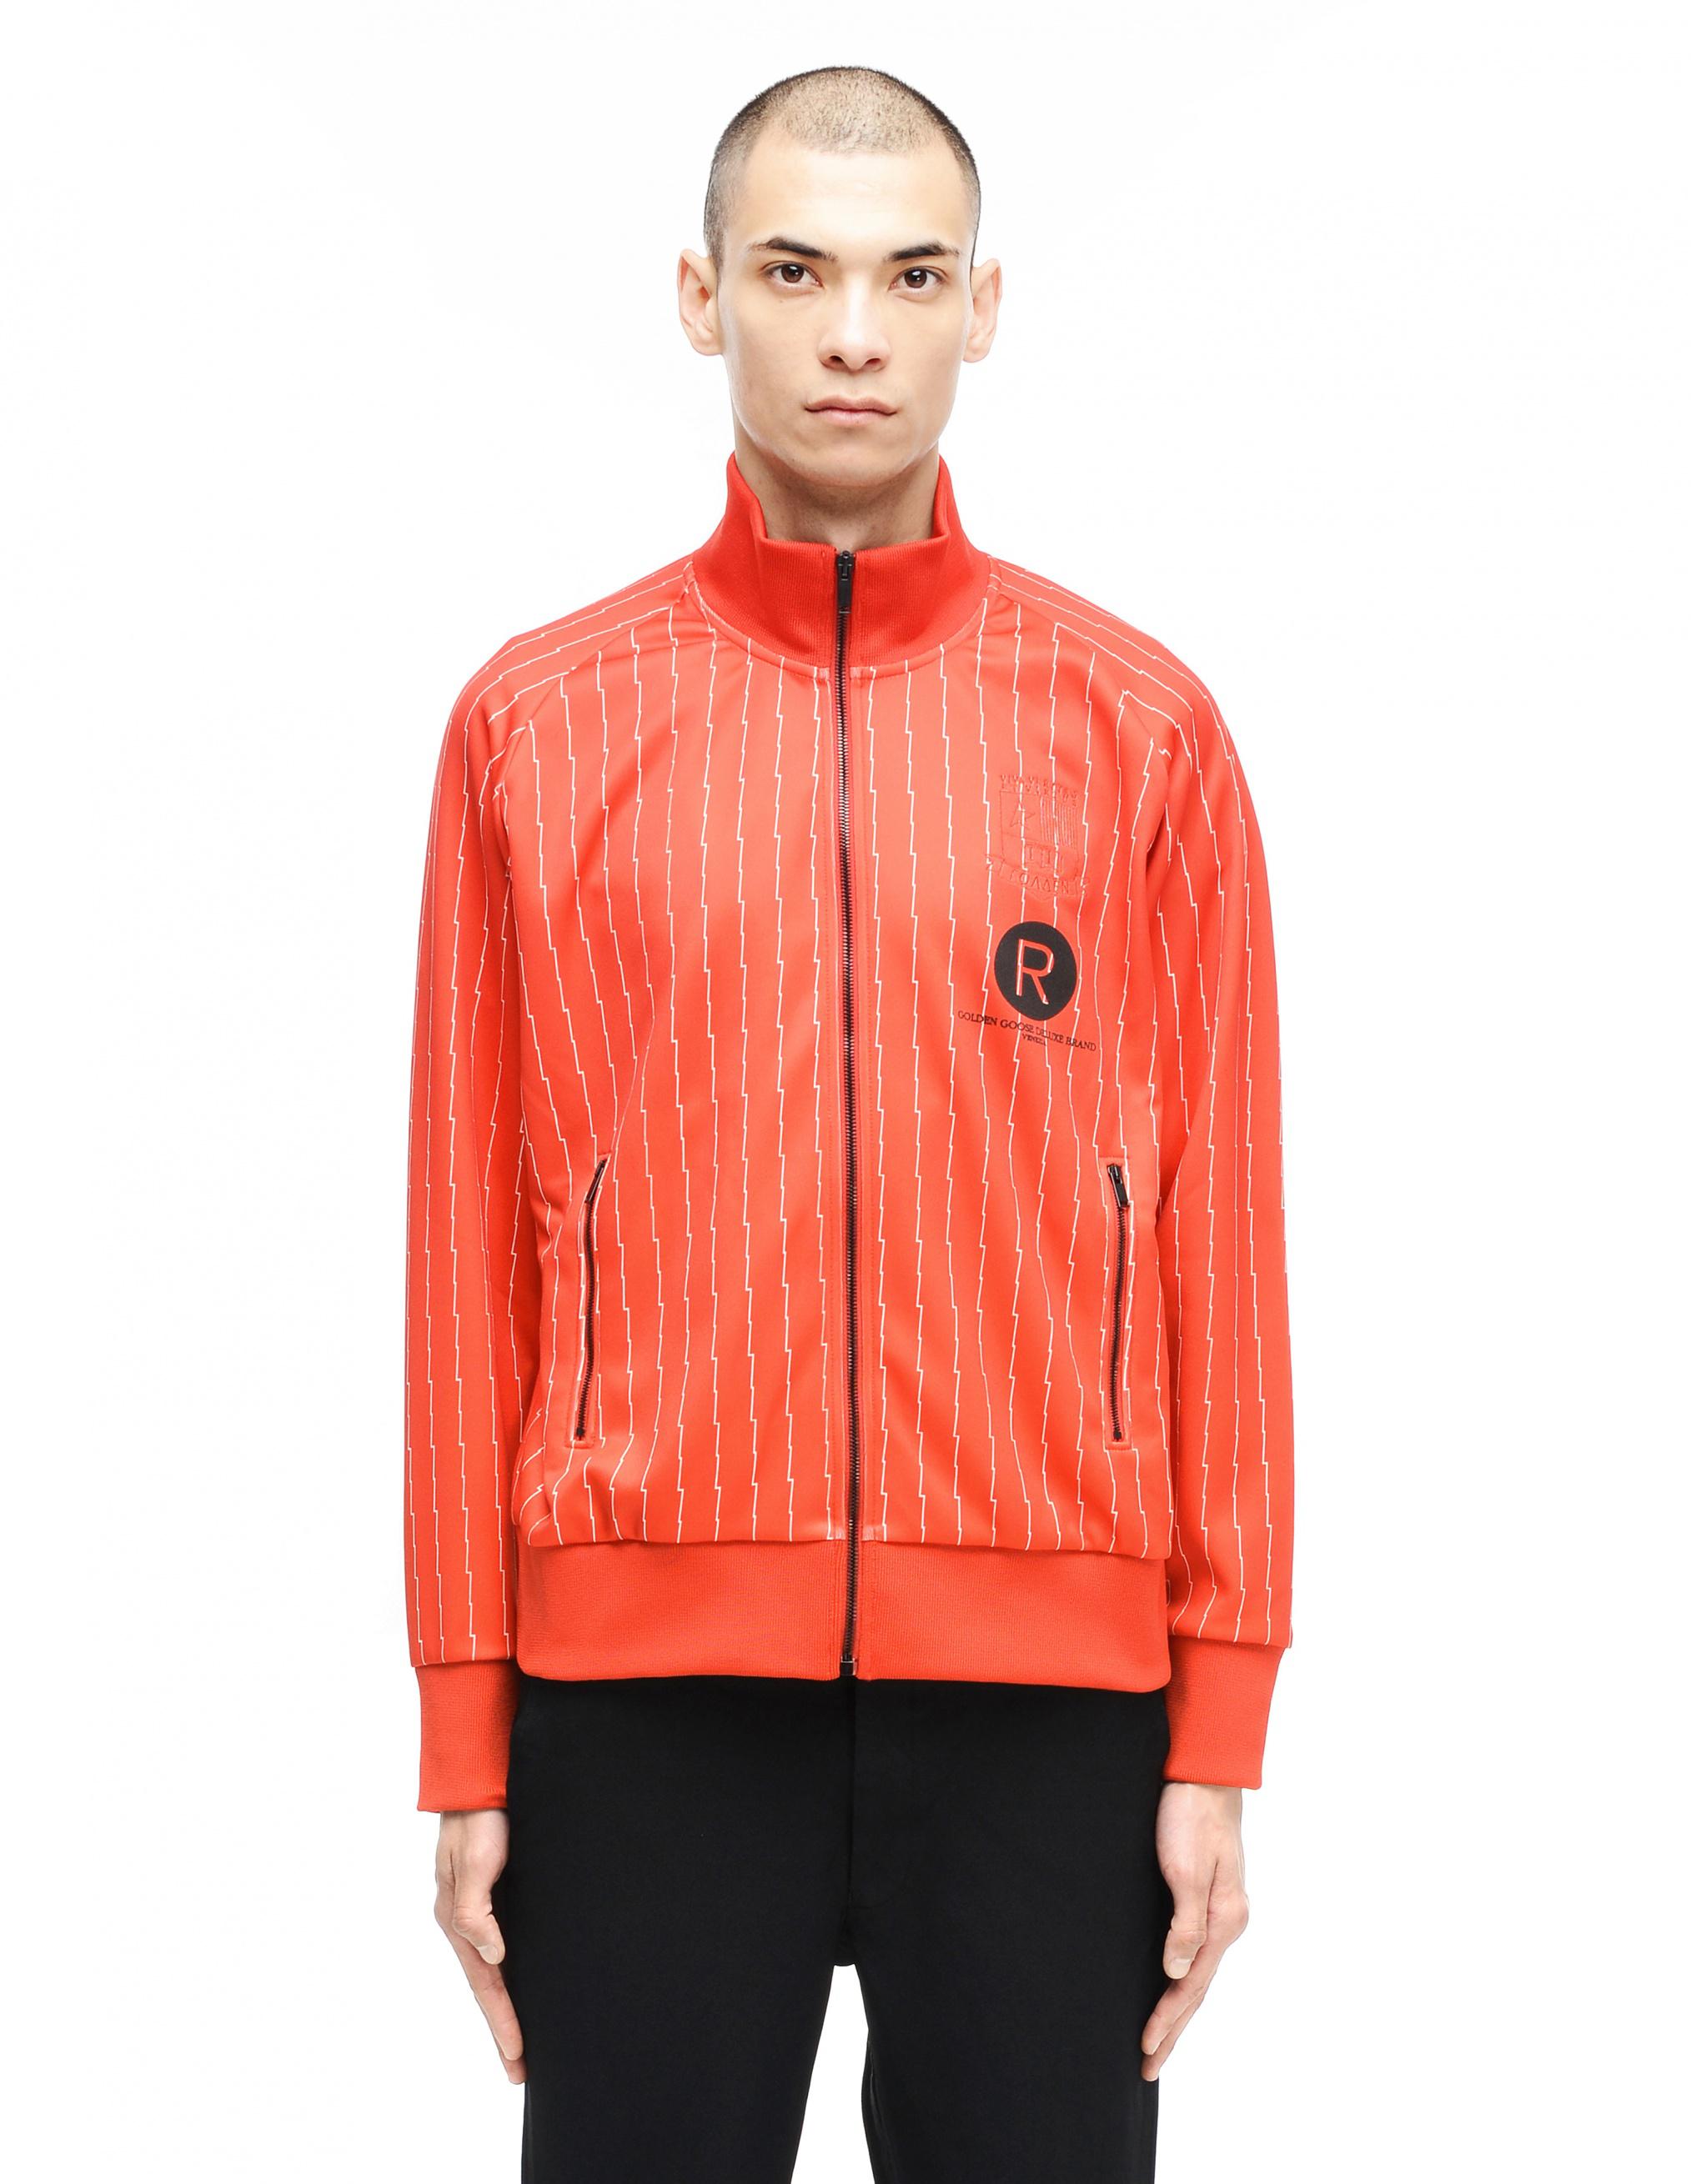 Lyst - Golden Goose Deluxe Brand Polyester Track Jacket in Red for Men